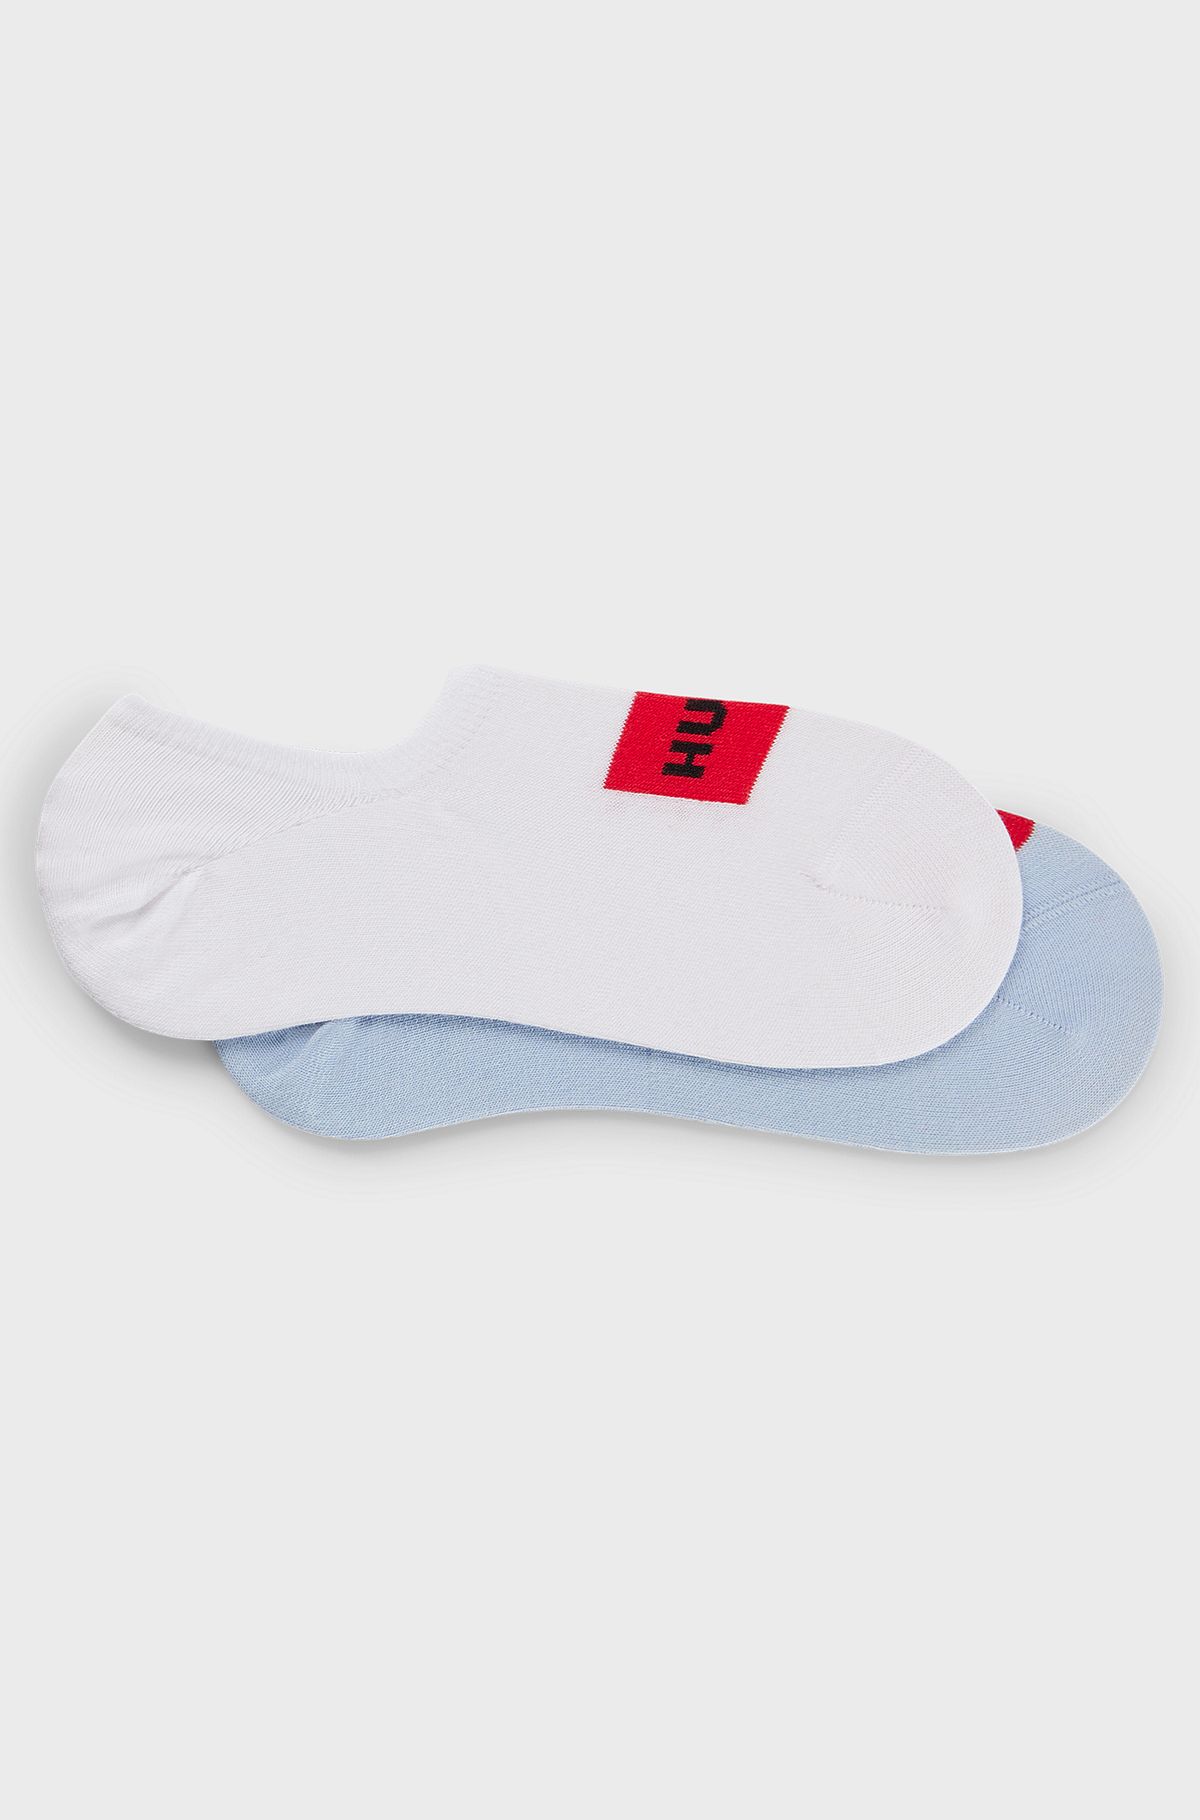 Two-pack of invisible socks with woven logo patch, Light Blue